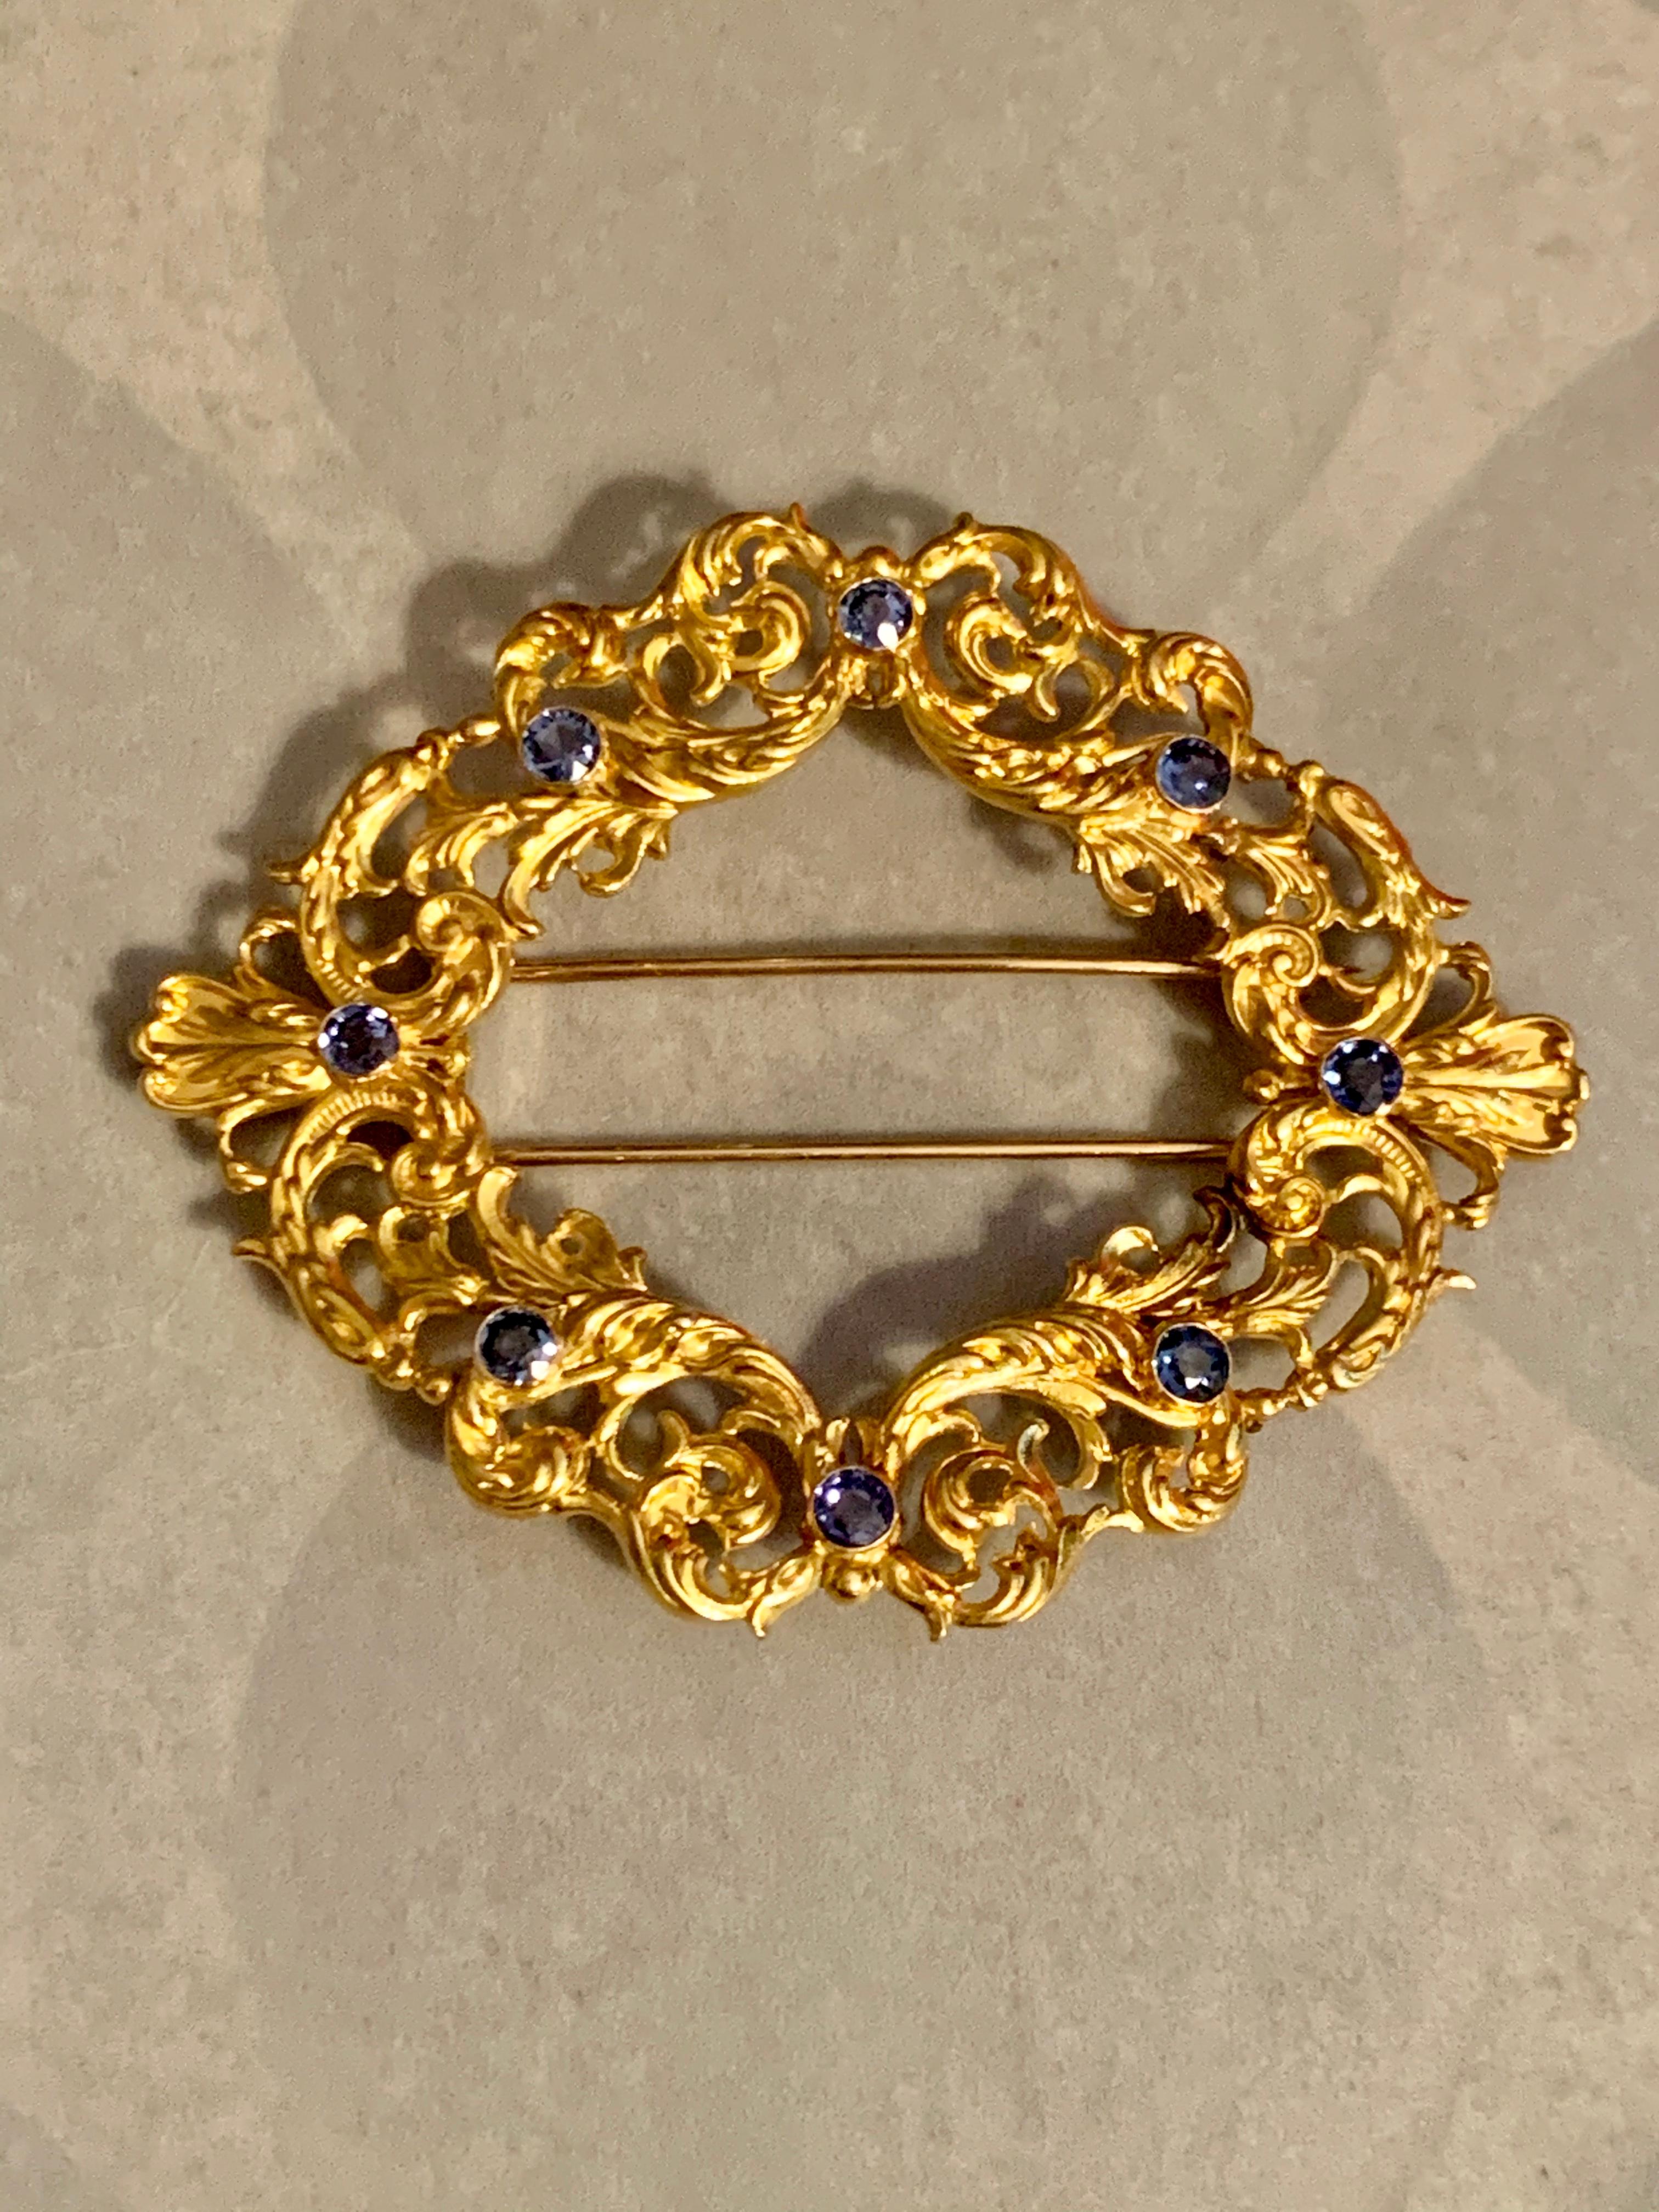 This lovely Victorian fur clip features eight 3.3mm round, faceted violet-blue Sapphires (possibly Montana).  The setting is 18 karat yellow Gold. 

Size: 2 3/4